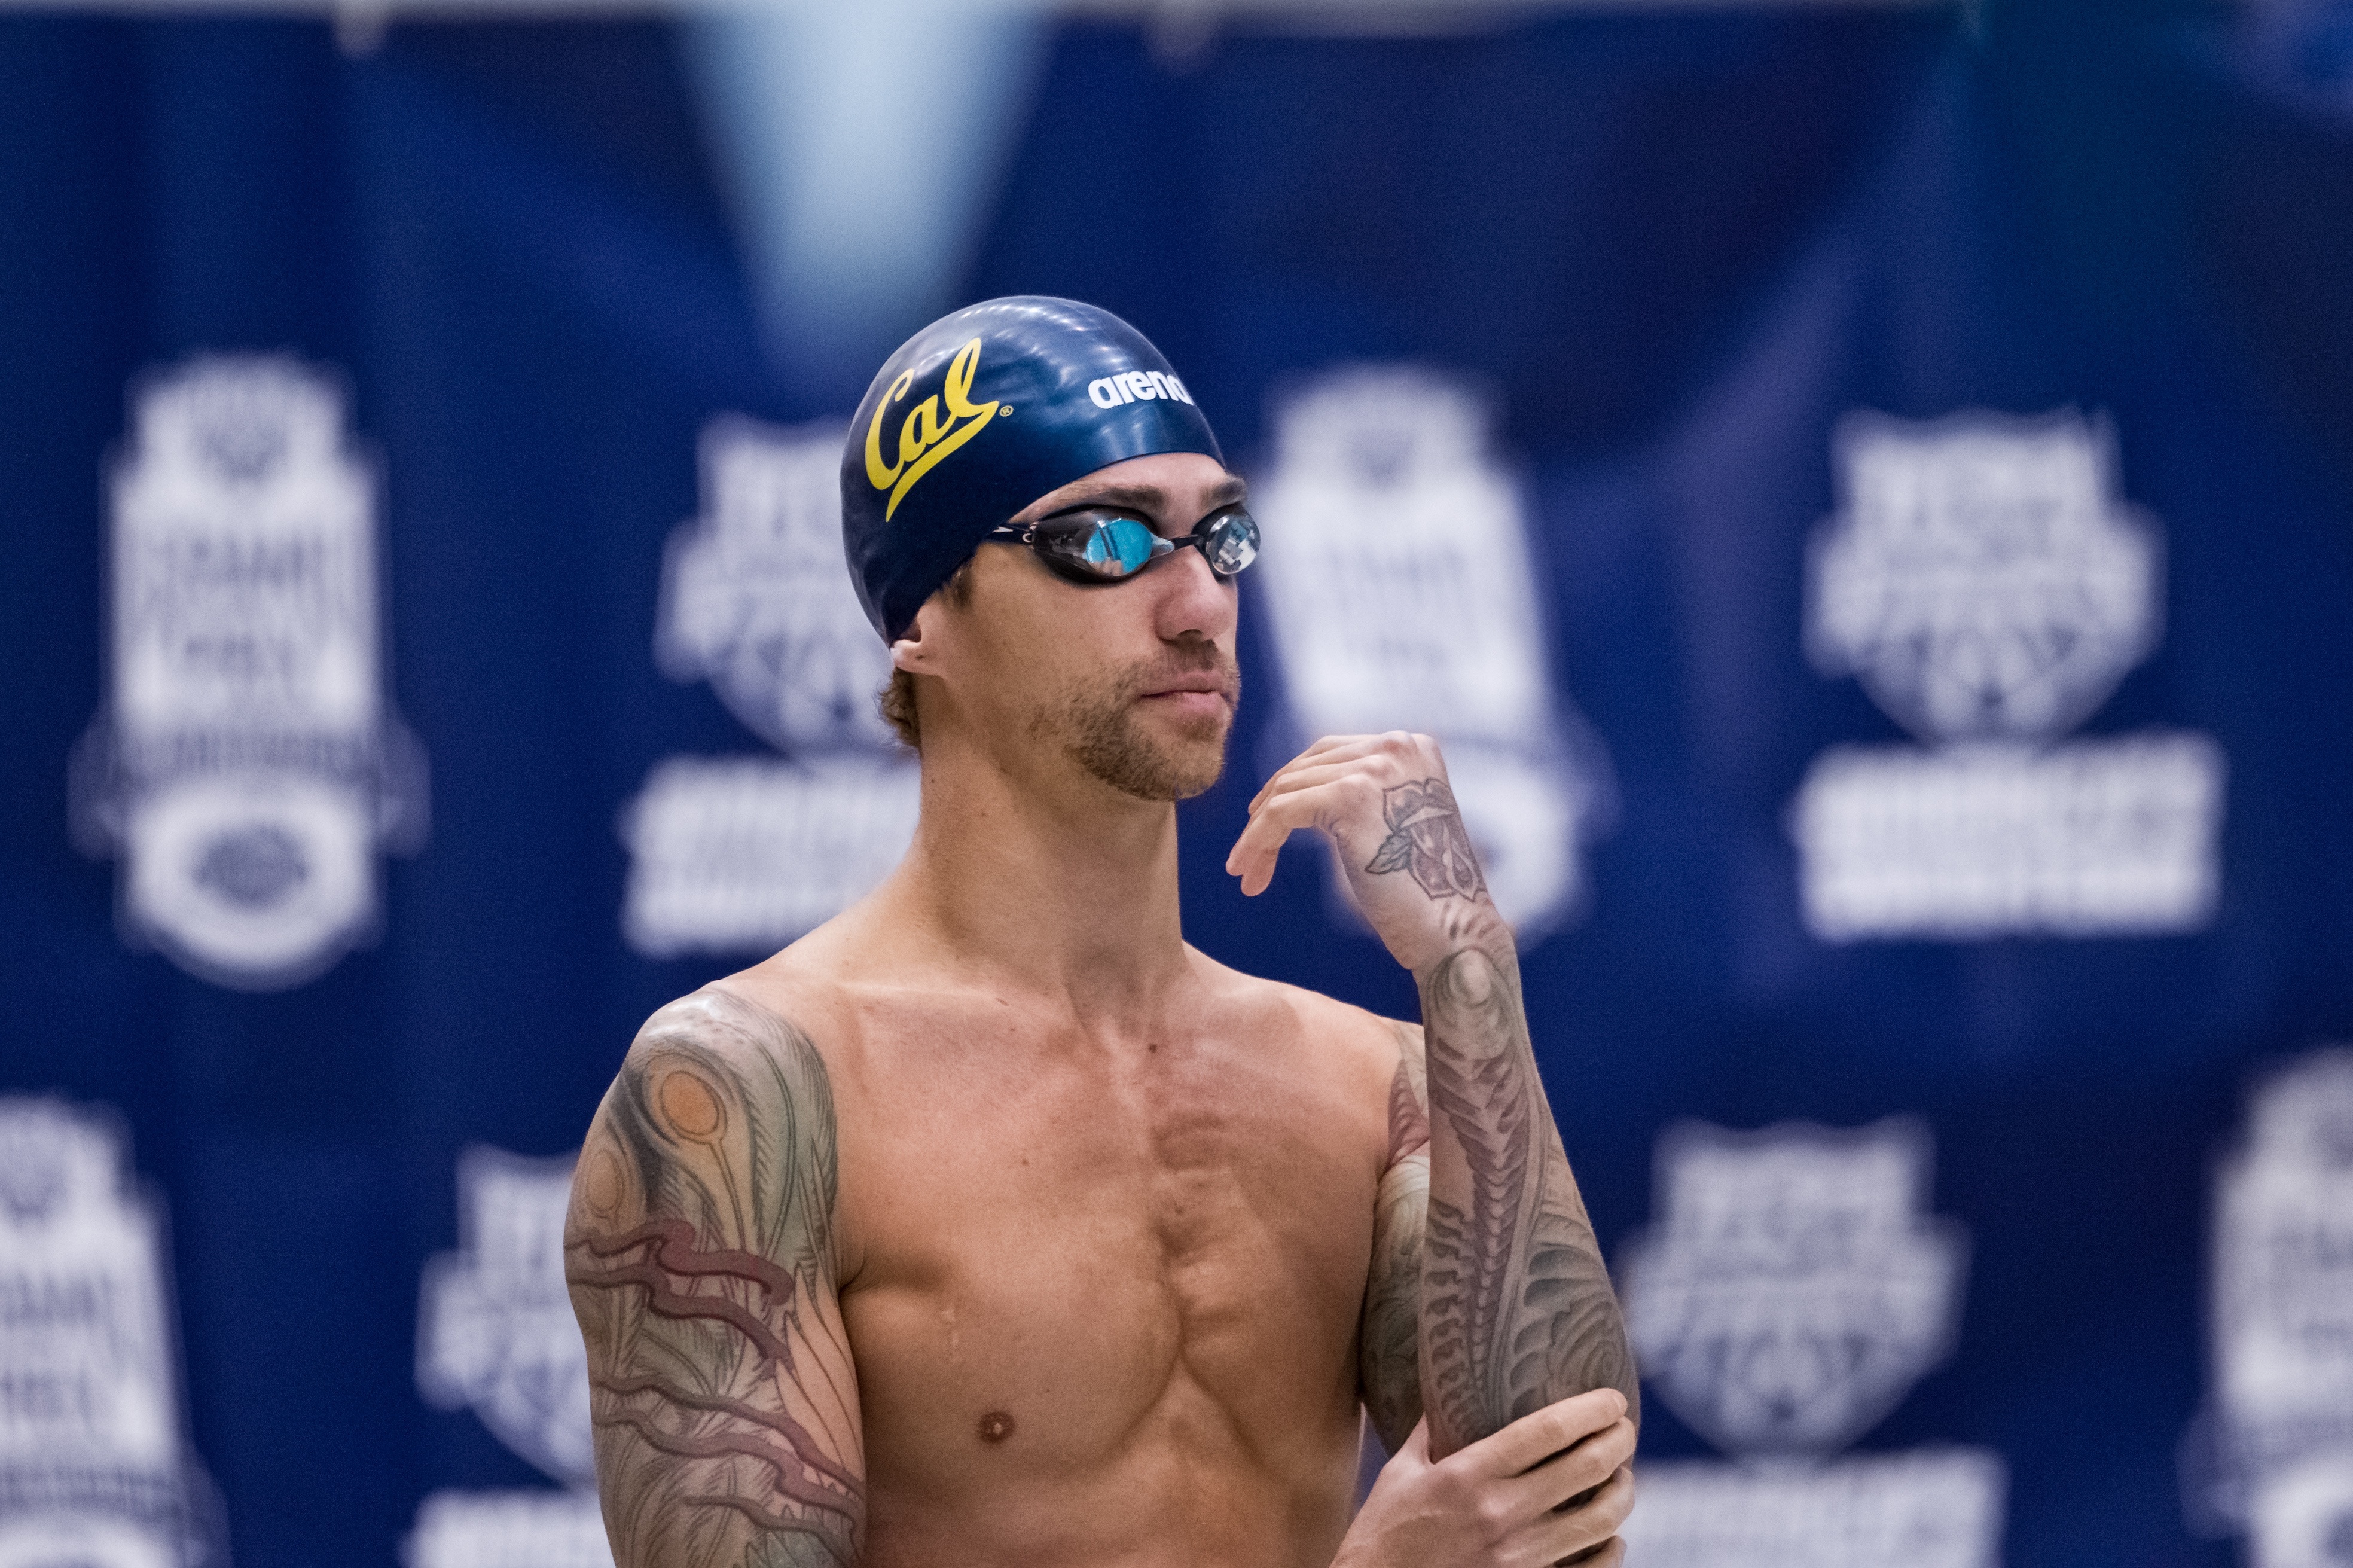 The Swimmers' Tattoo Photo Vault